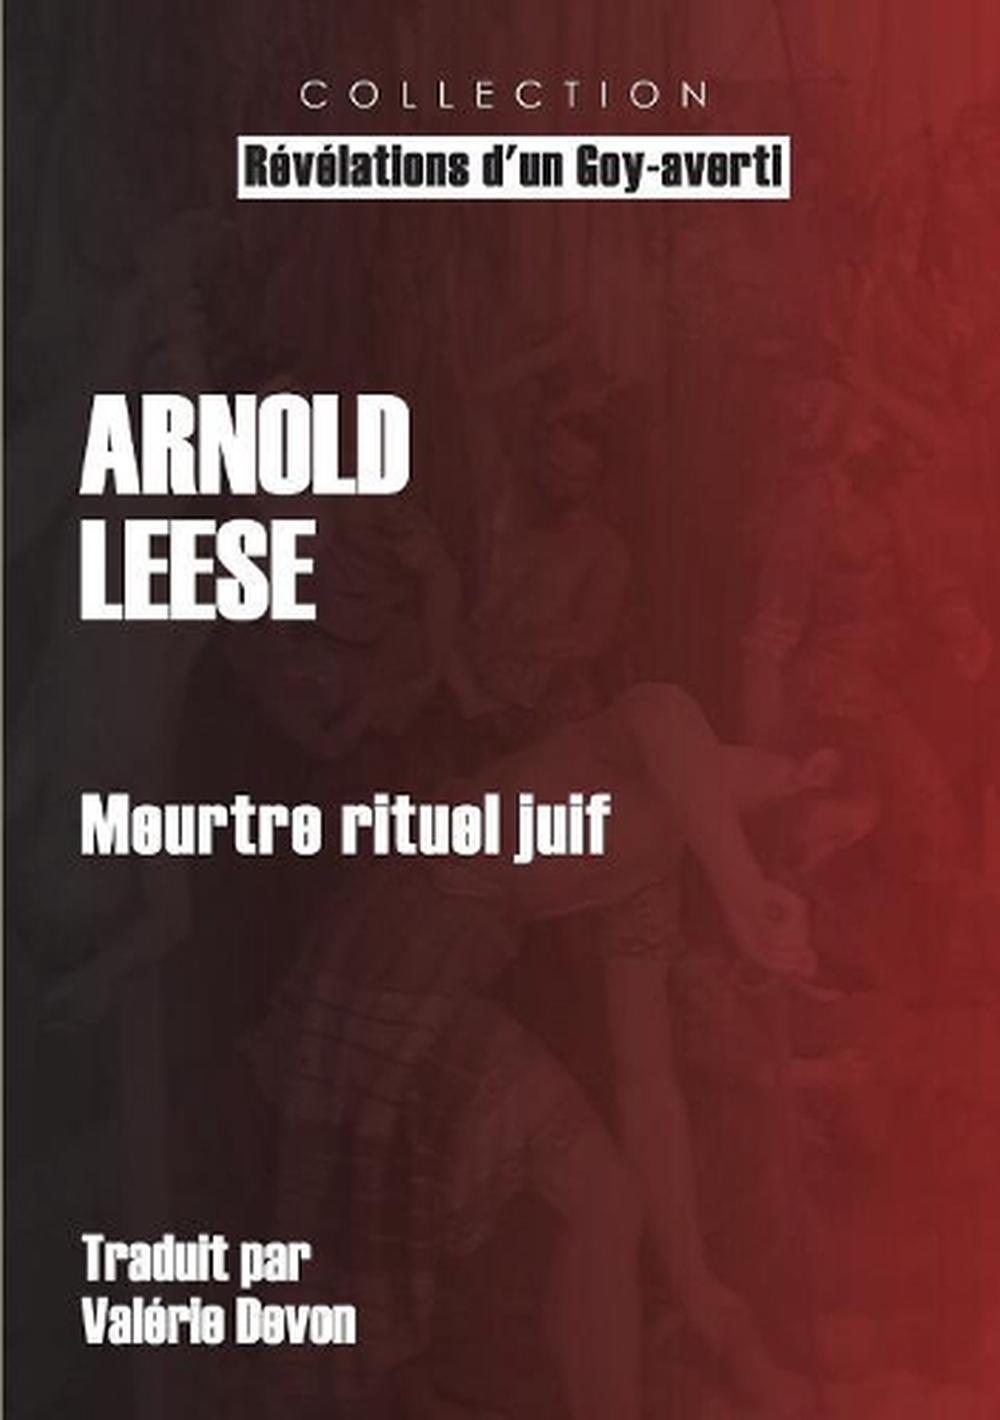 Meurtre rituel juif by Arnold S. Leese (French) Paperback Book Free Shipping! - Photo 1 sur 1